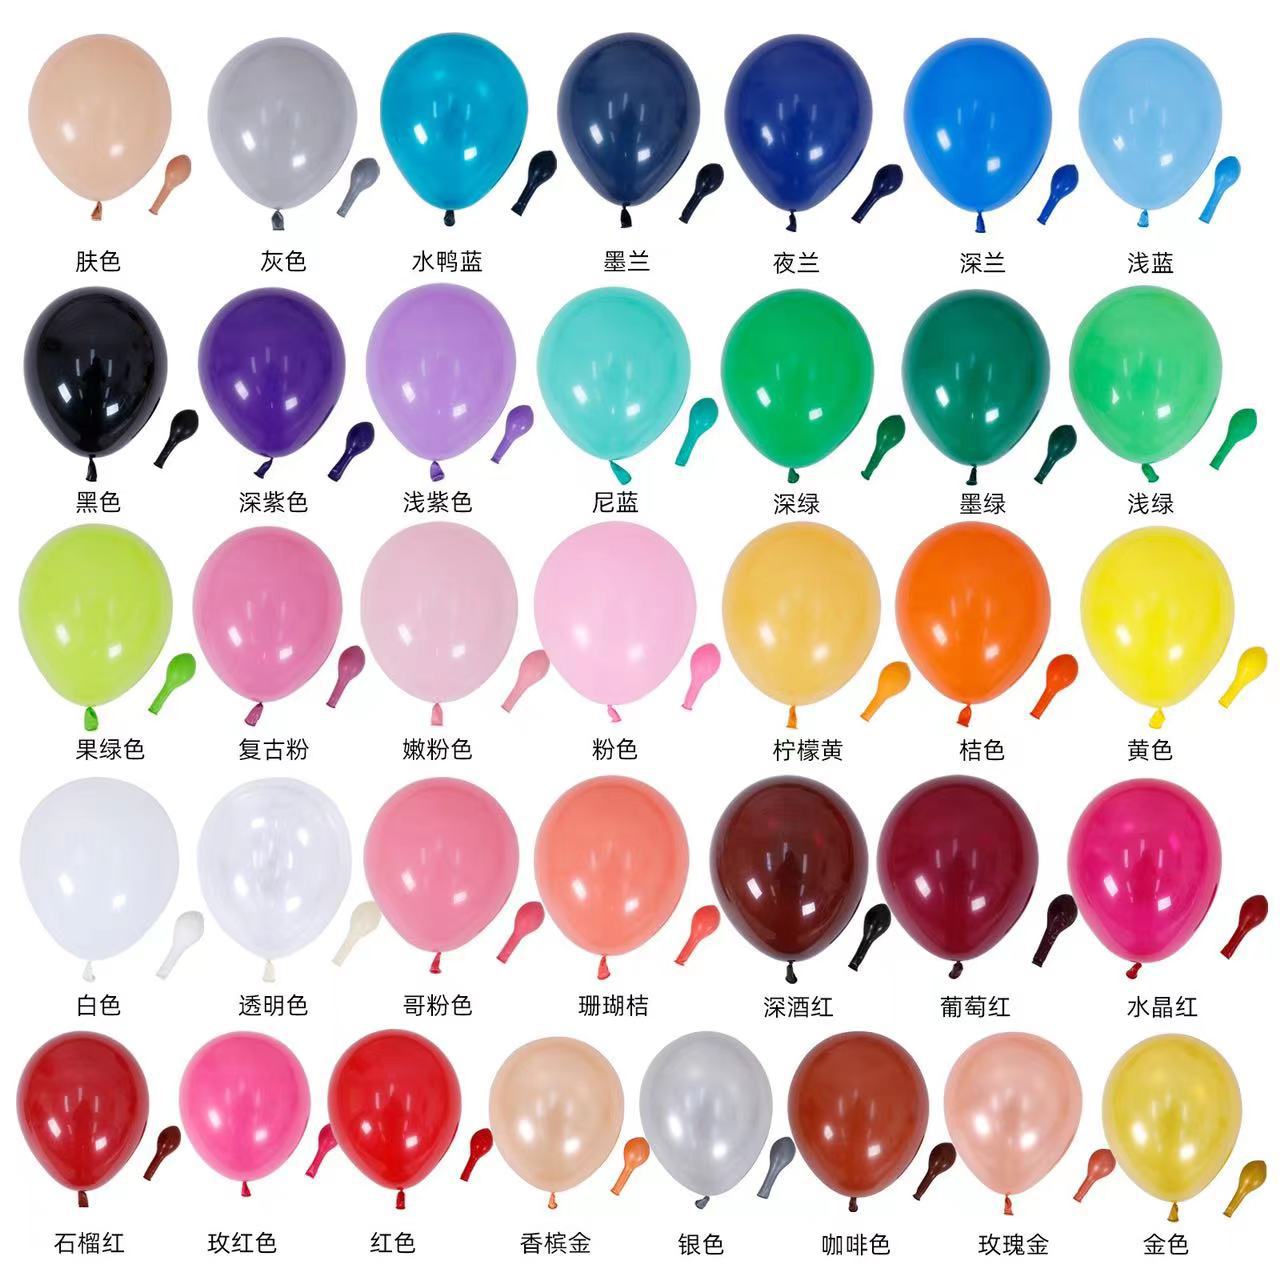 Wholesale Matte Thick round Rubber Balloons 5-Inch 10-Inch Birthday Wedding Ceremony Layout Balloon Party Decoration Balloon